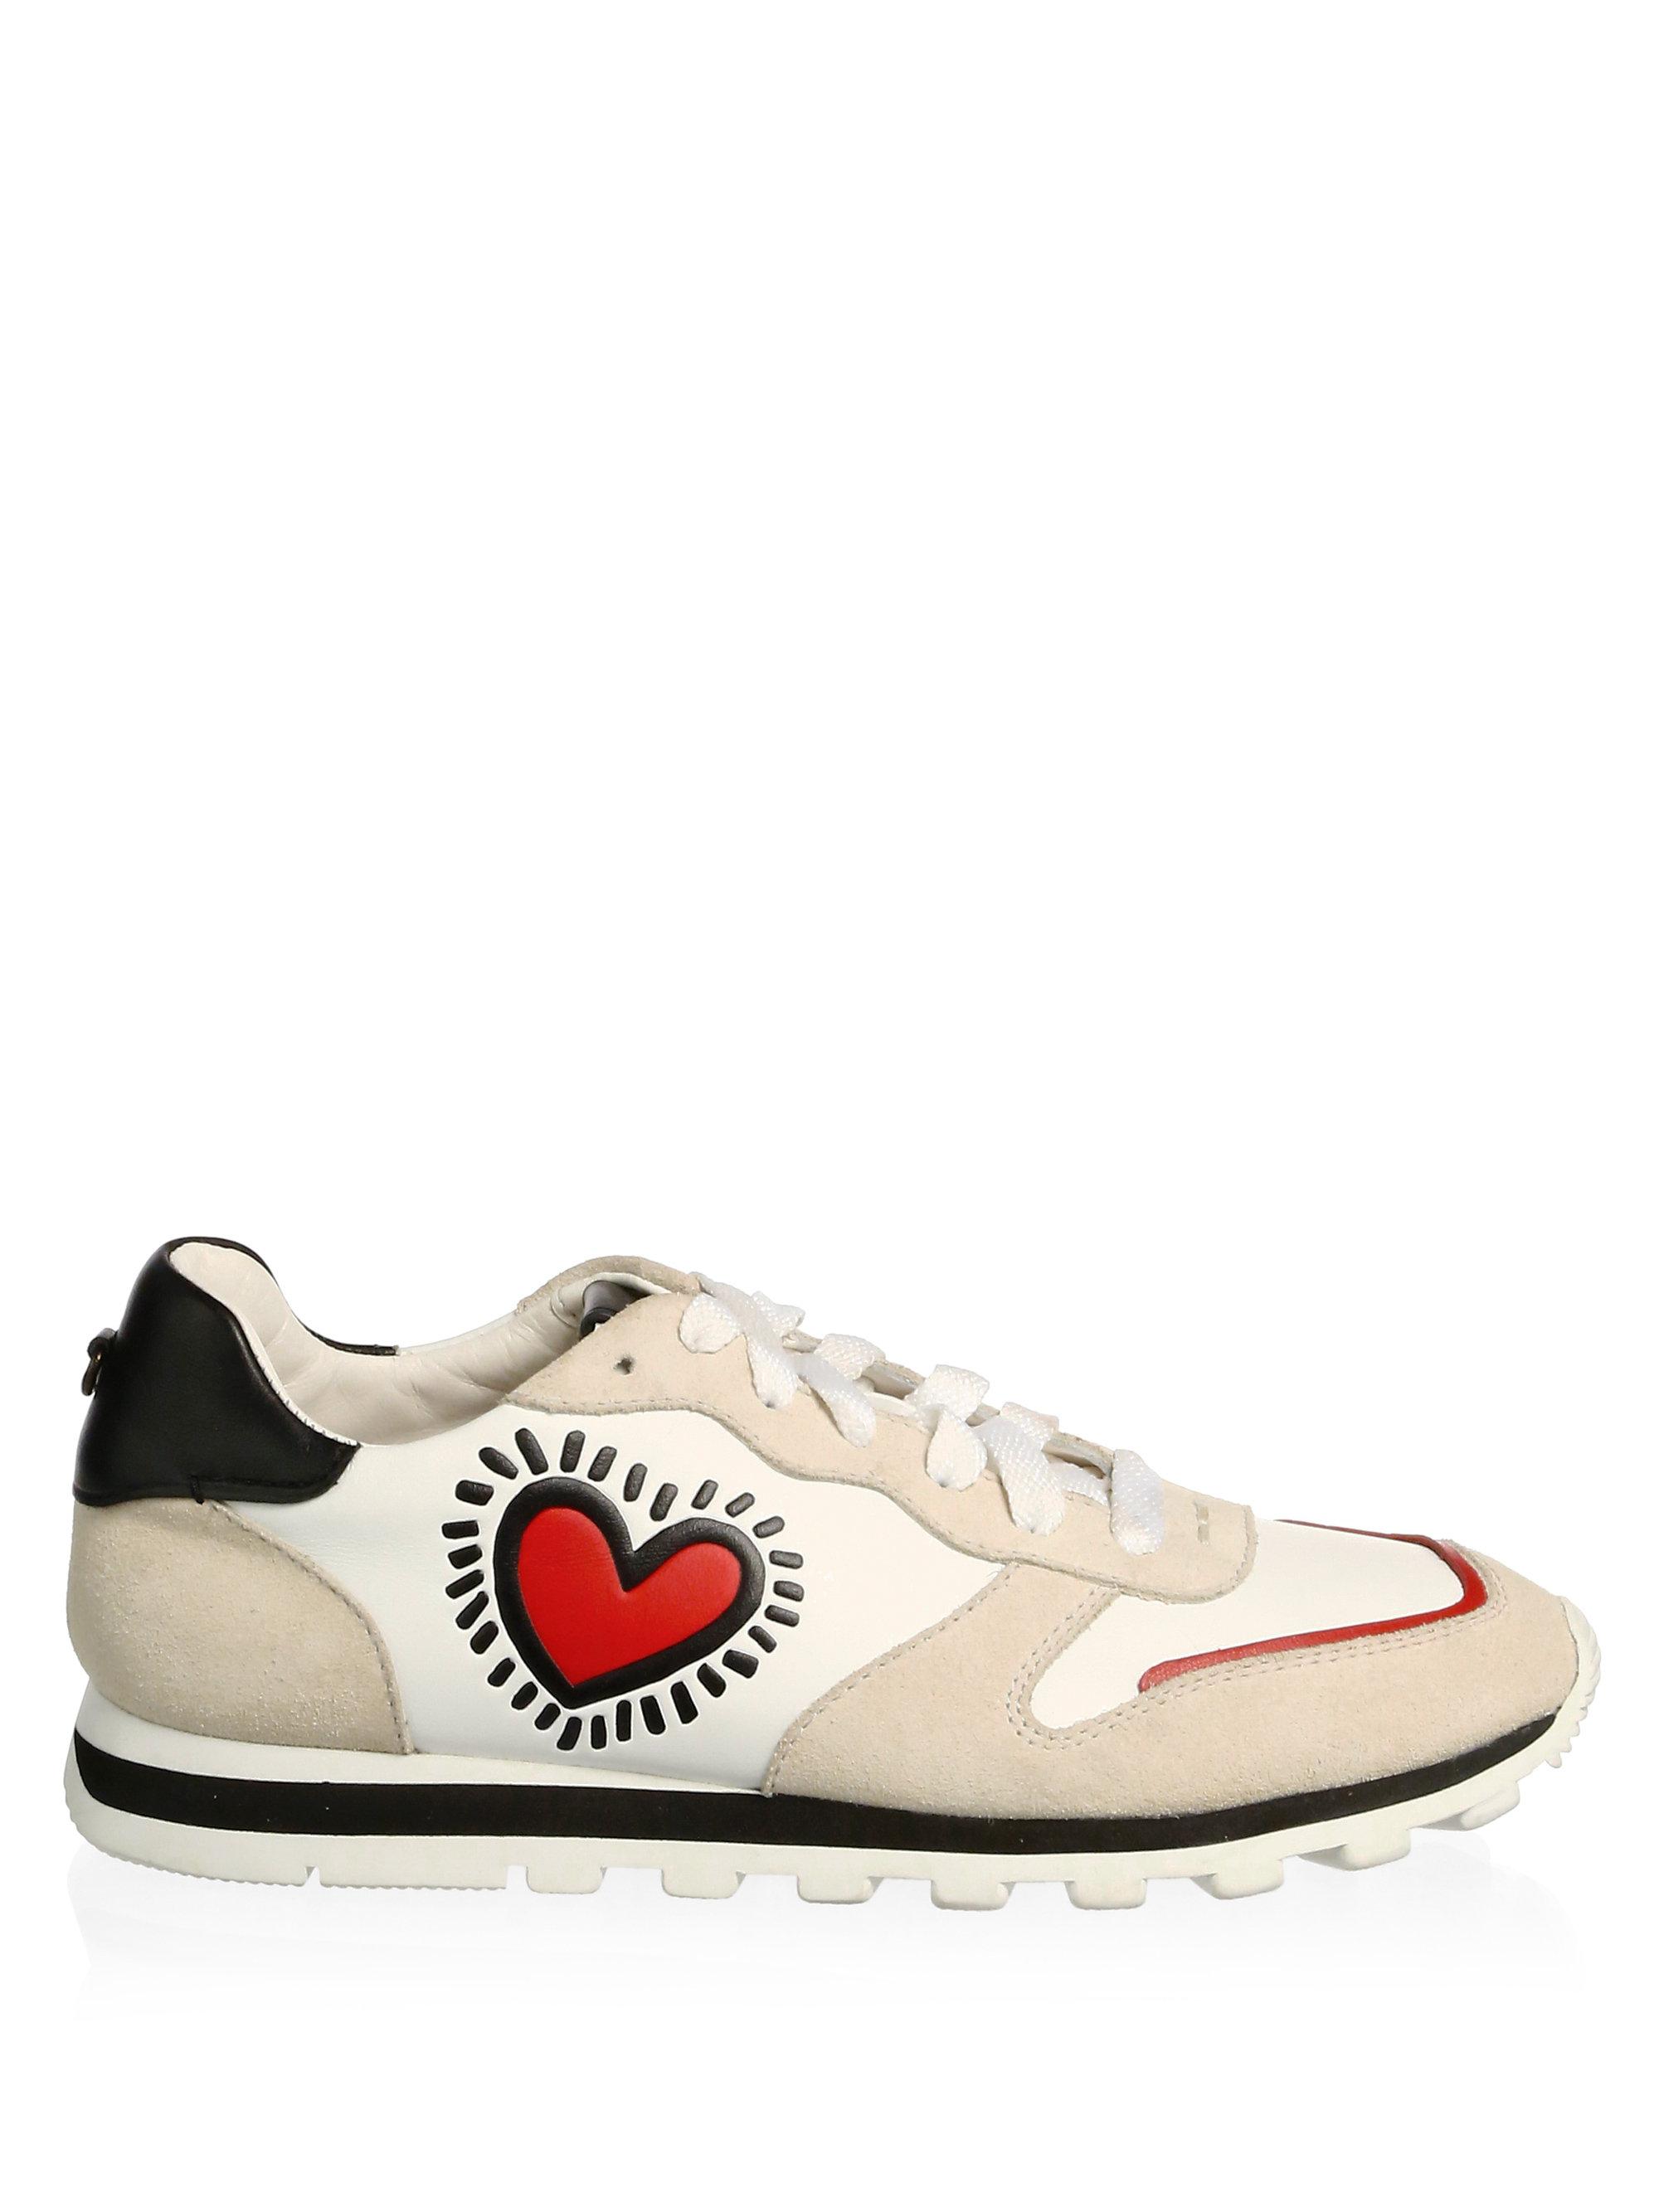 COACH Keith Haring Runner Heart Sneakers - Lyst